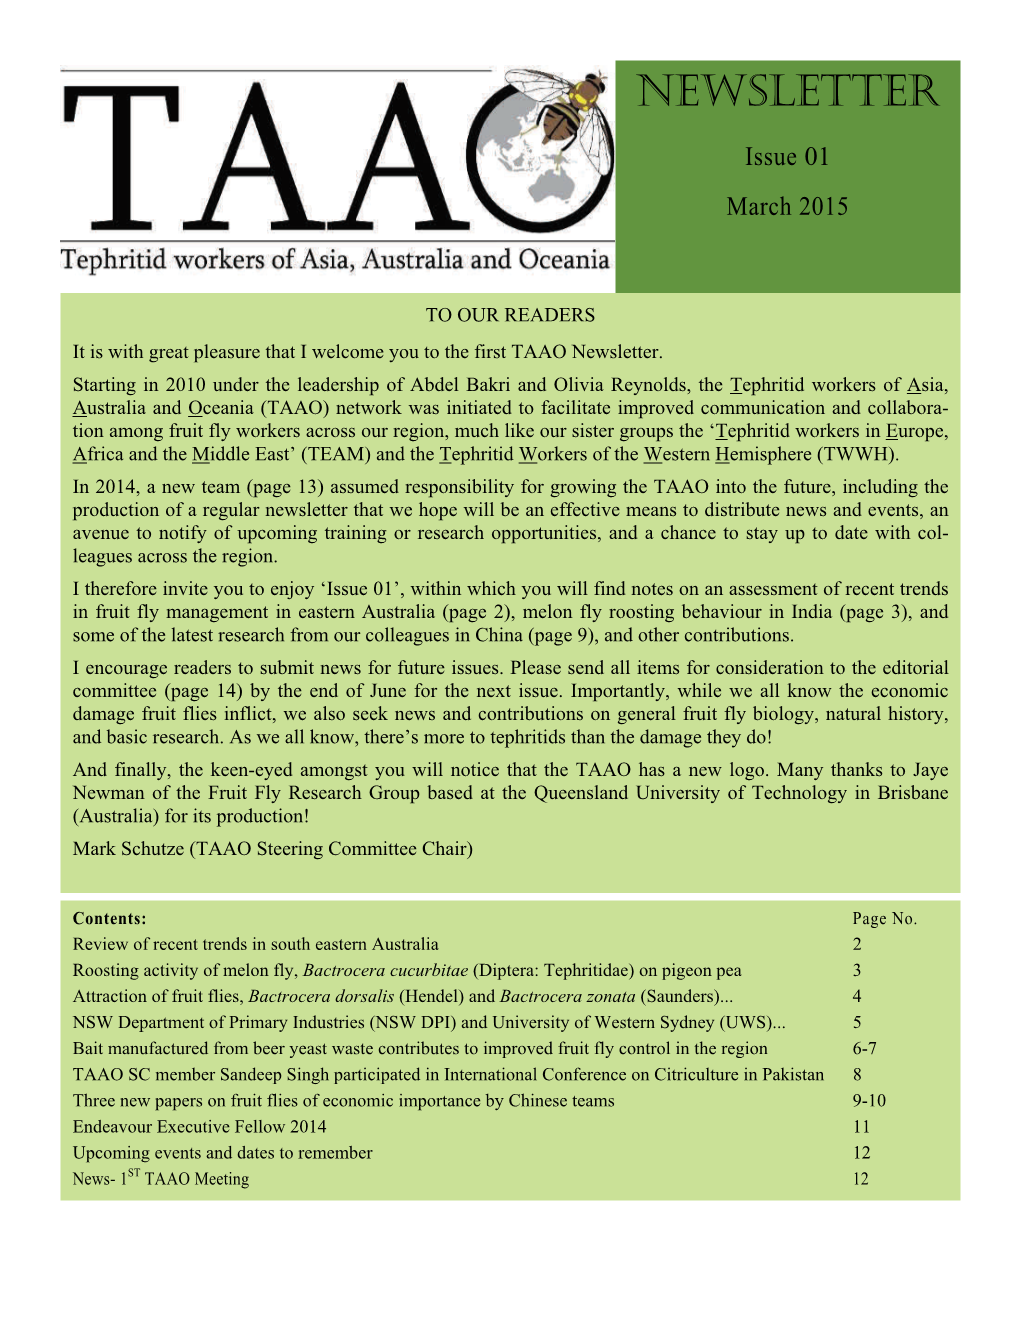 TAAO Newsletter March 2015